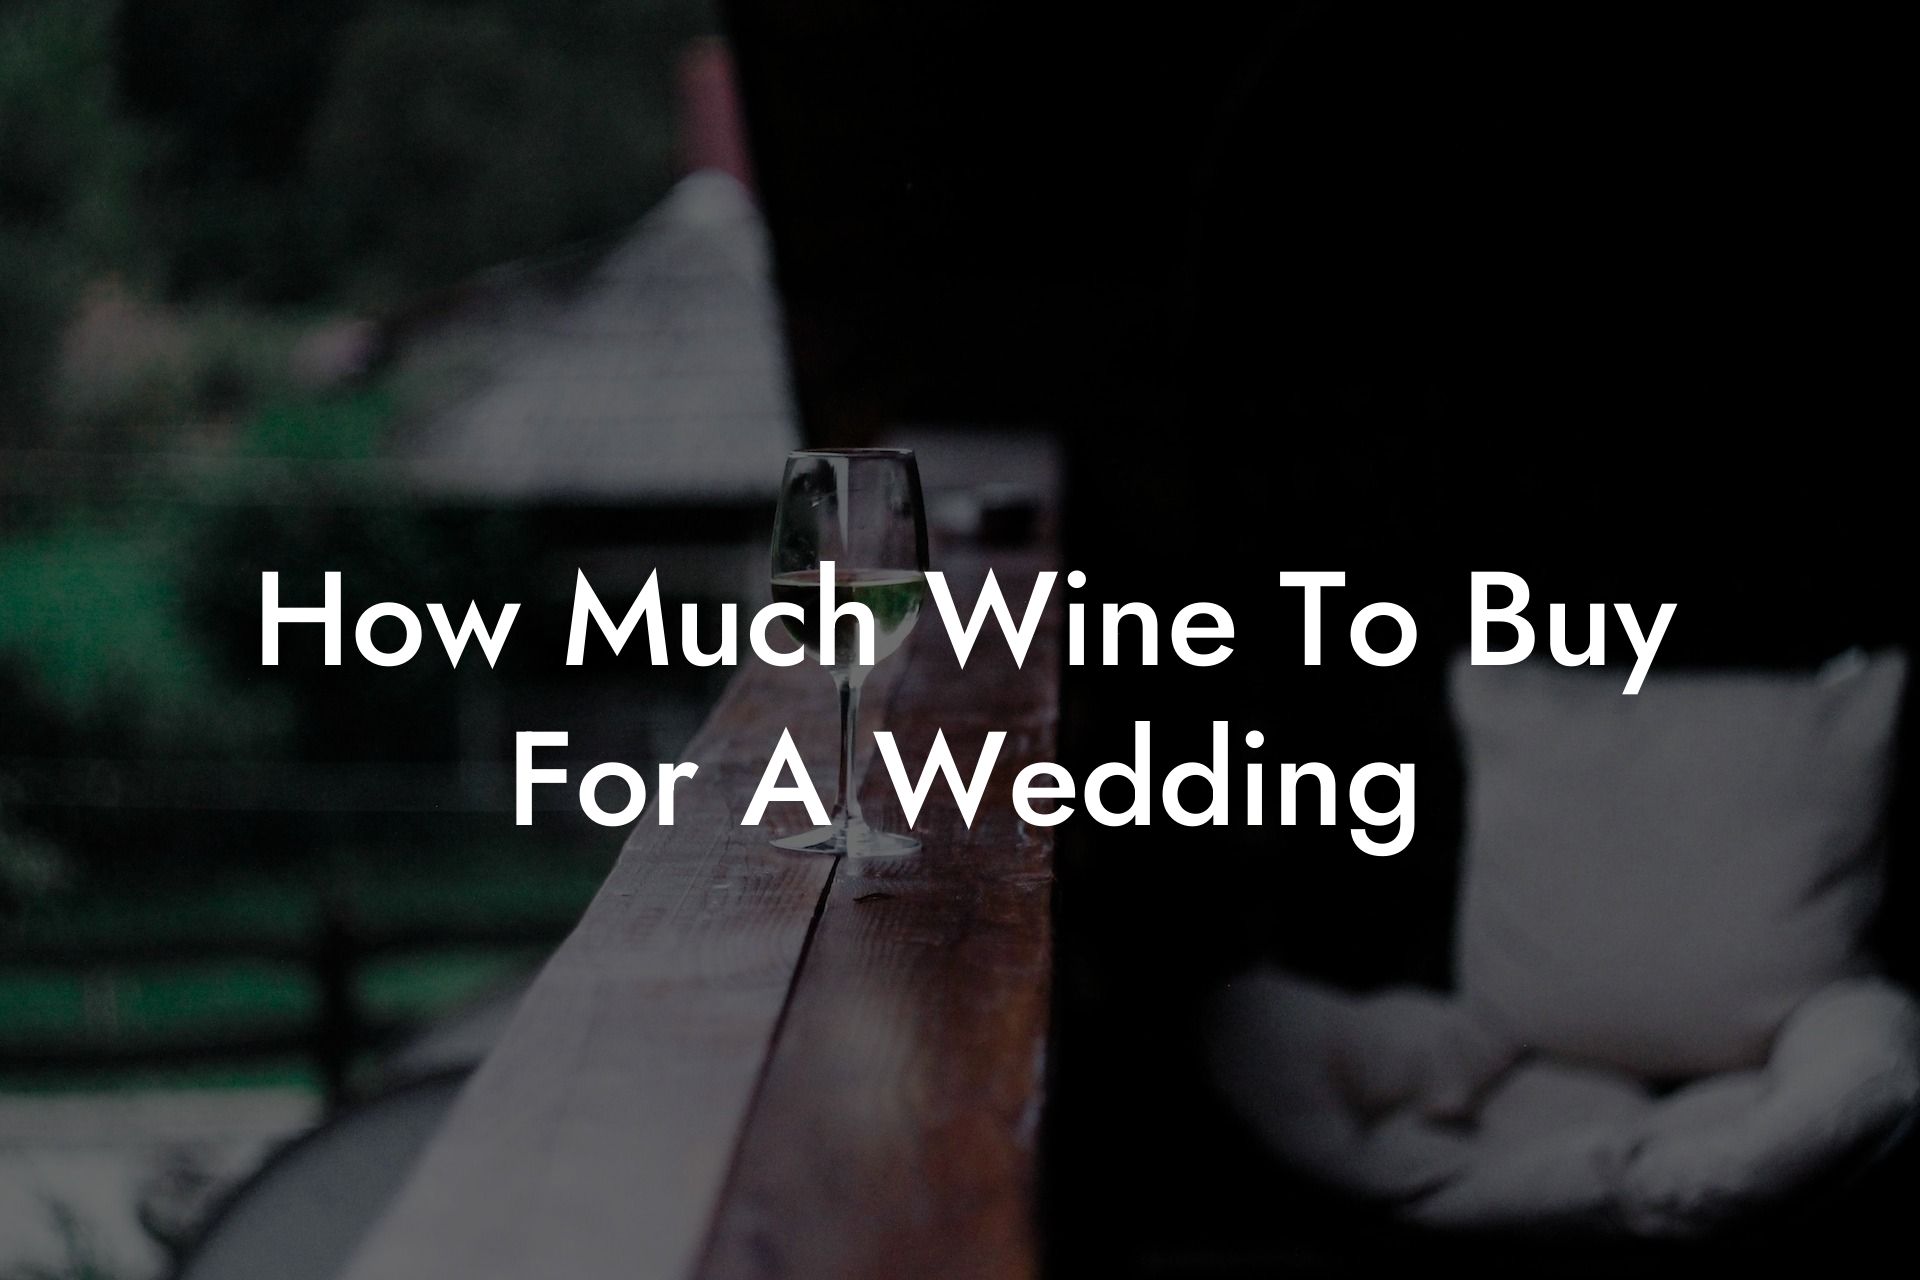 How Much Wine To Buy For A Wedding